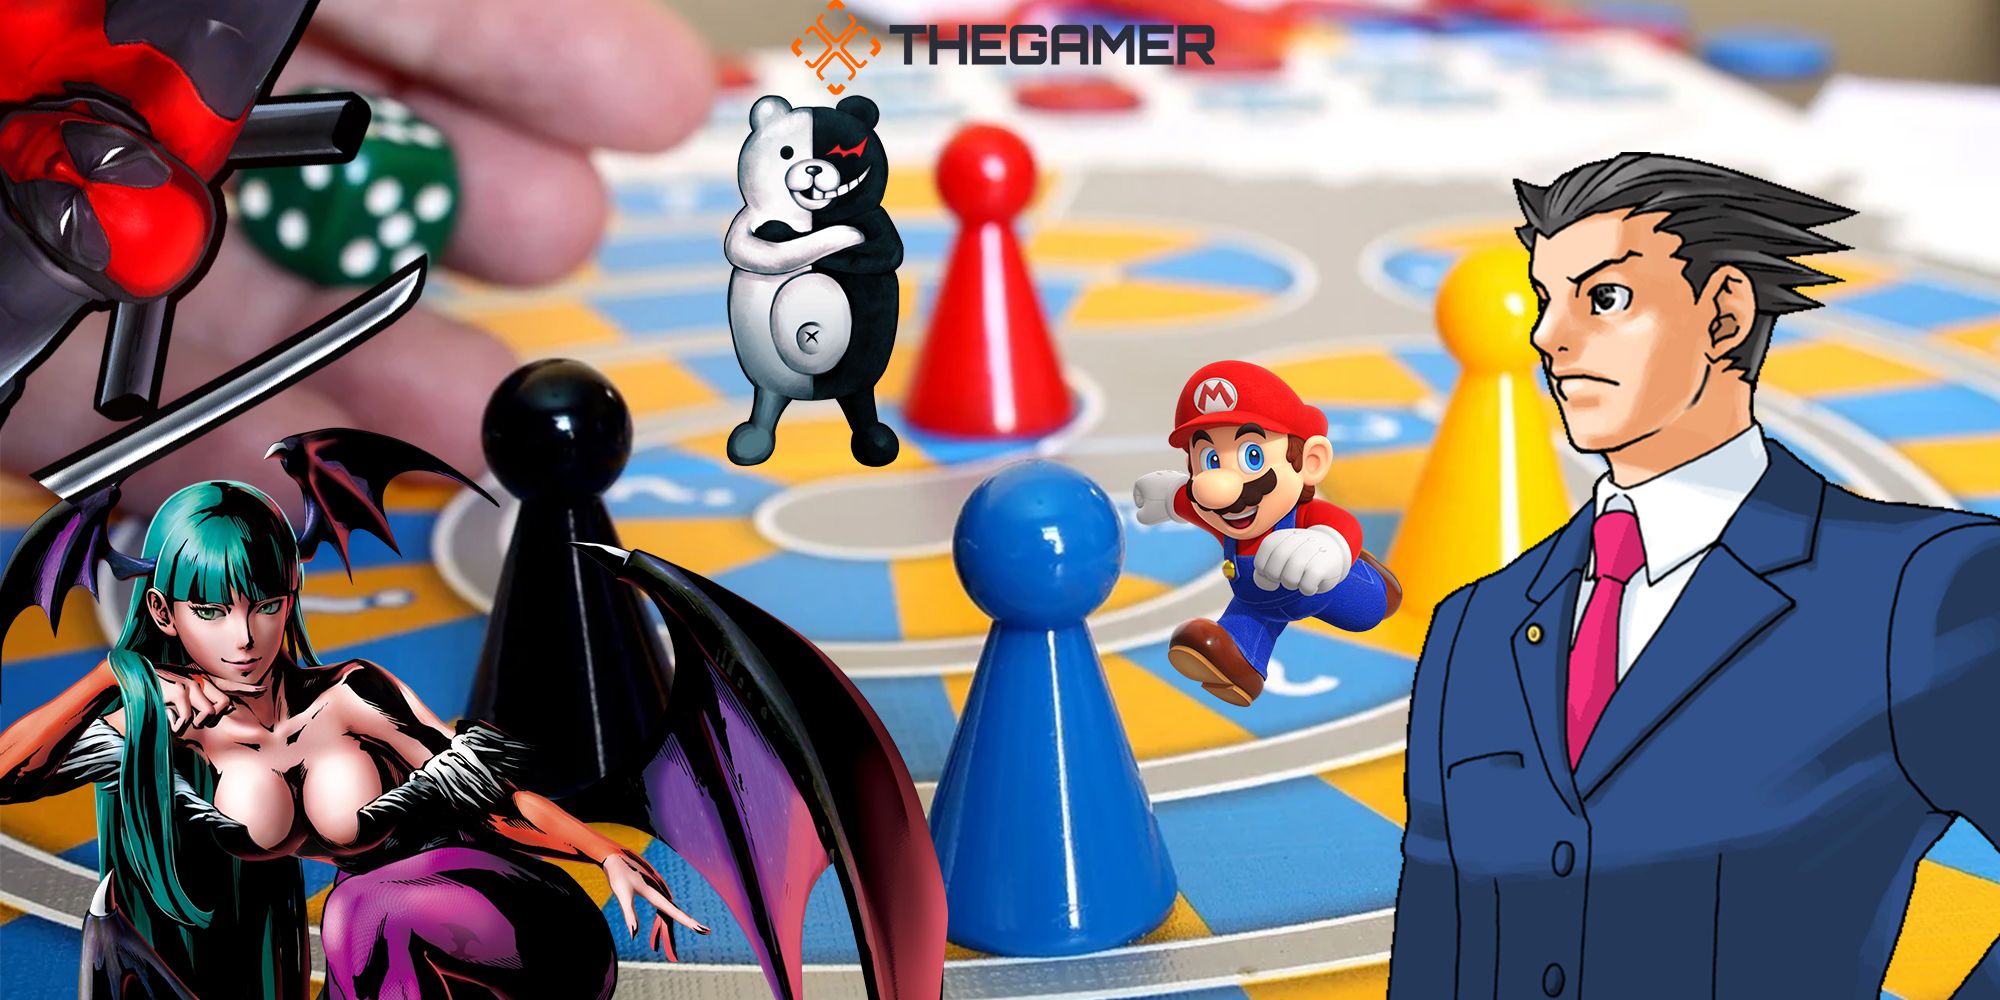 Morrigan, Deadpool, and Phoenix Wright gather around a game board. Mario and Monokuma run on the board like game pieces. Custom Image for TG.